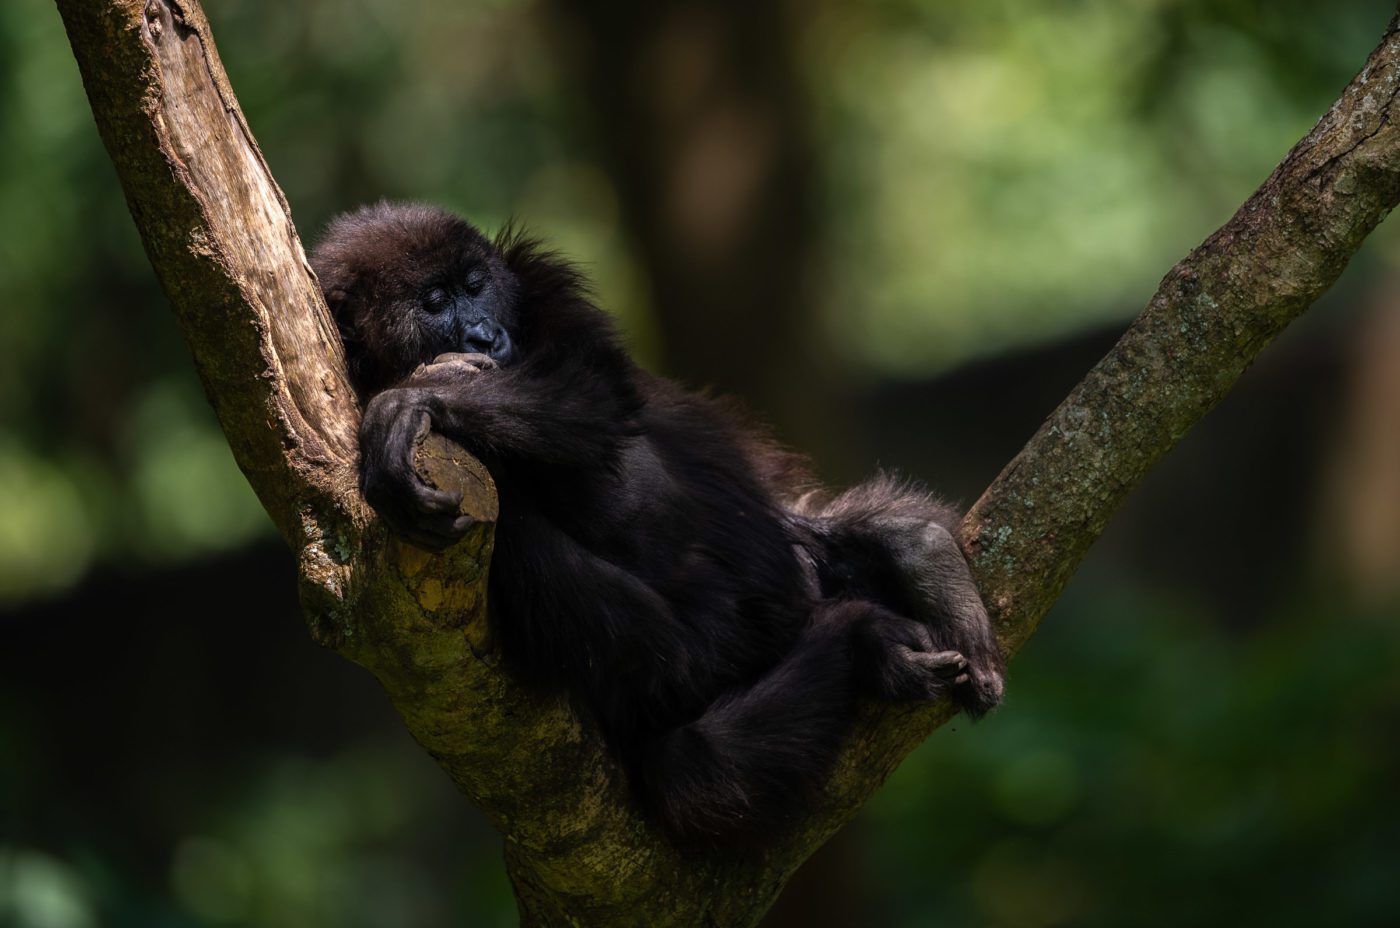 An image of an orphaned mountain gorilla sleeping in a tree